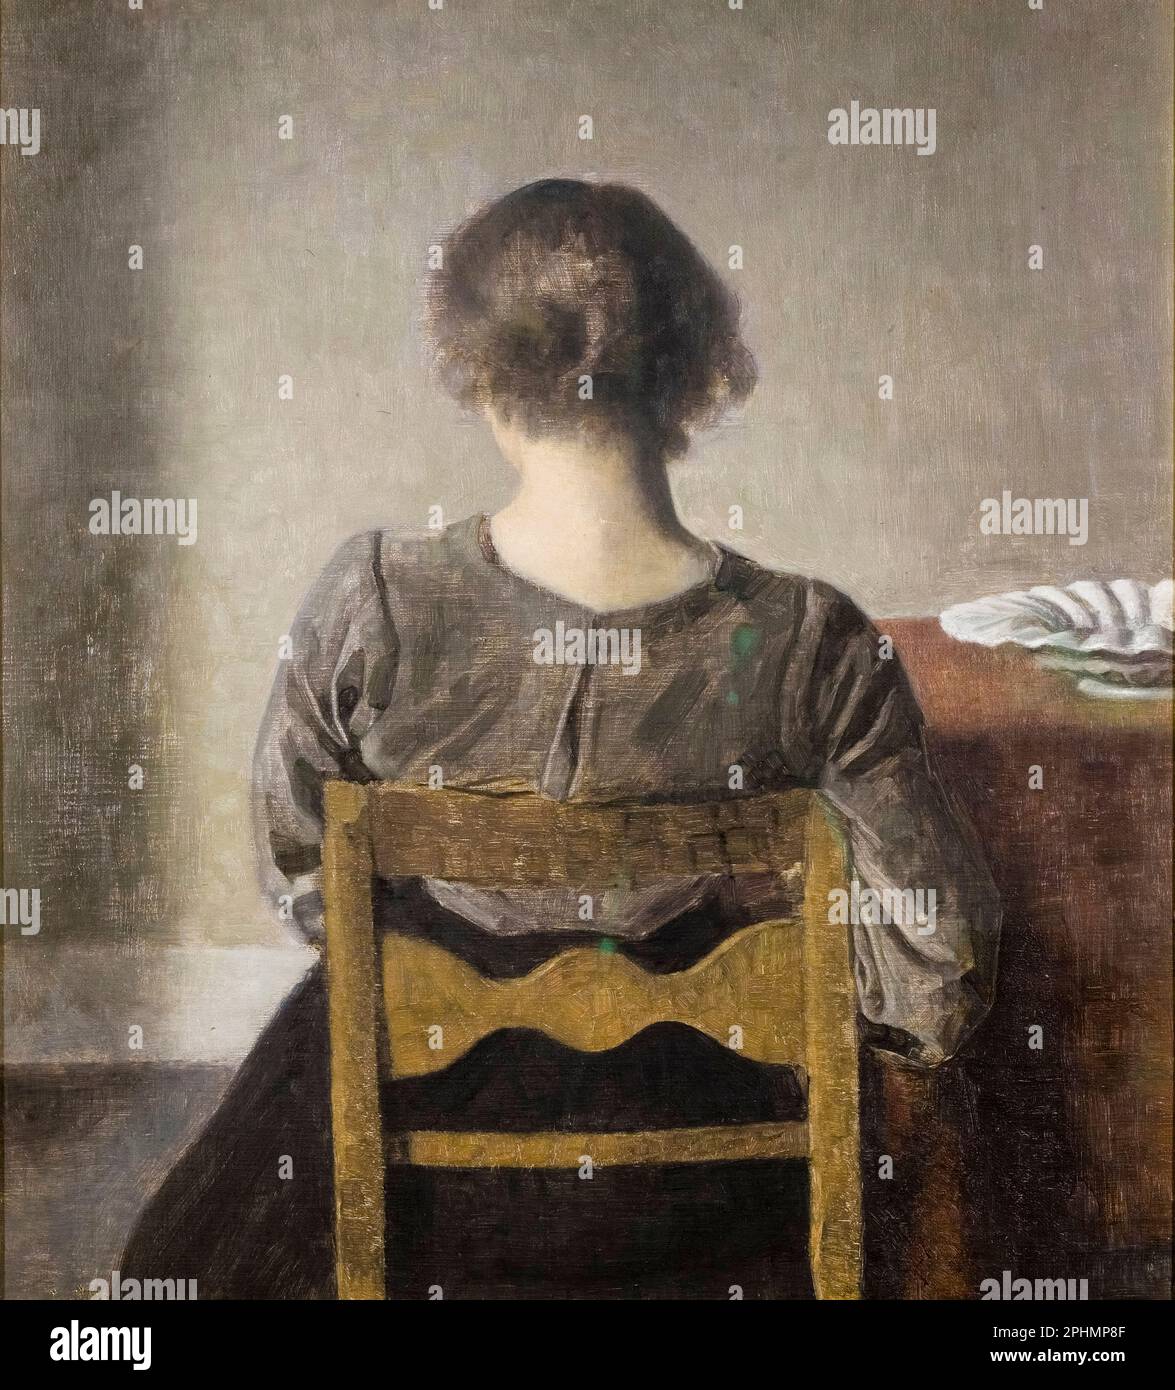 Vilhelm Hammershoi, Rest, painting in oil on canvas, 1905 Stock Photo